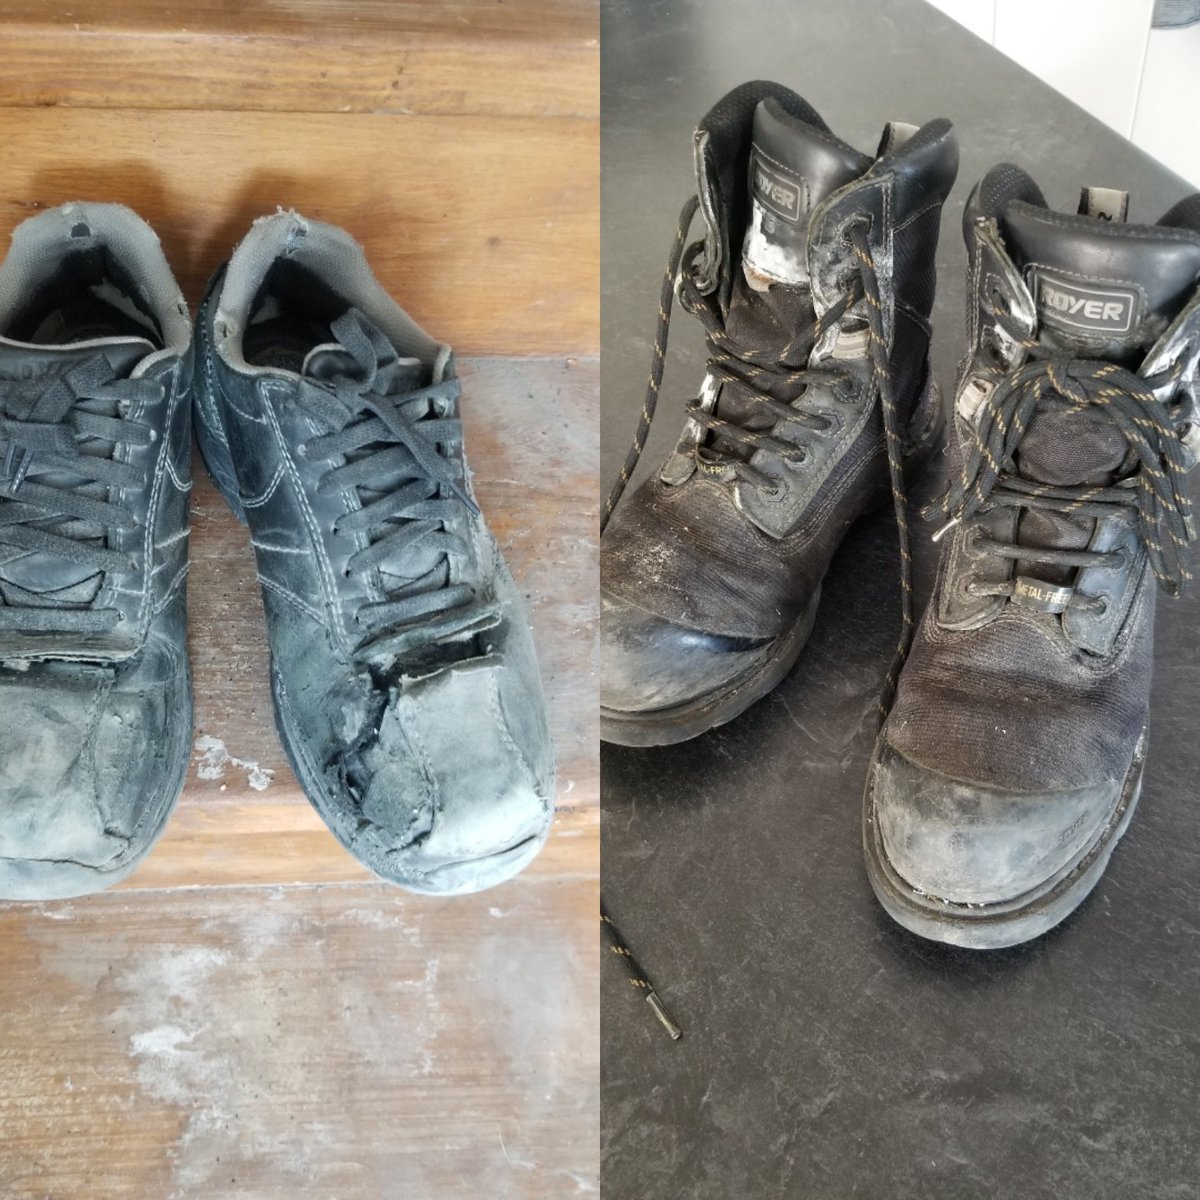 Time to retire the ole #CanadianMade #Royer shoes... after only *1* year at a relatively clean indoor job?? #WindowFactory

Versus the TWO years I wore these boots at a #shitshow of an indoor/outdoor job... #TireRecycling.

#RoyerWorkBoots 100% recommend.

Their shoes... hmm.